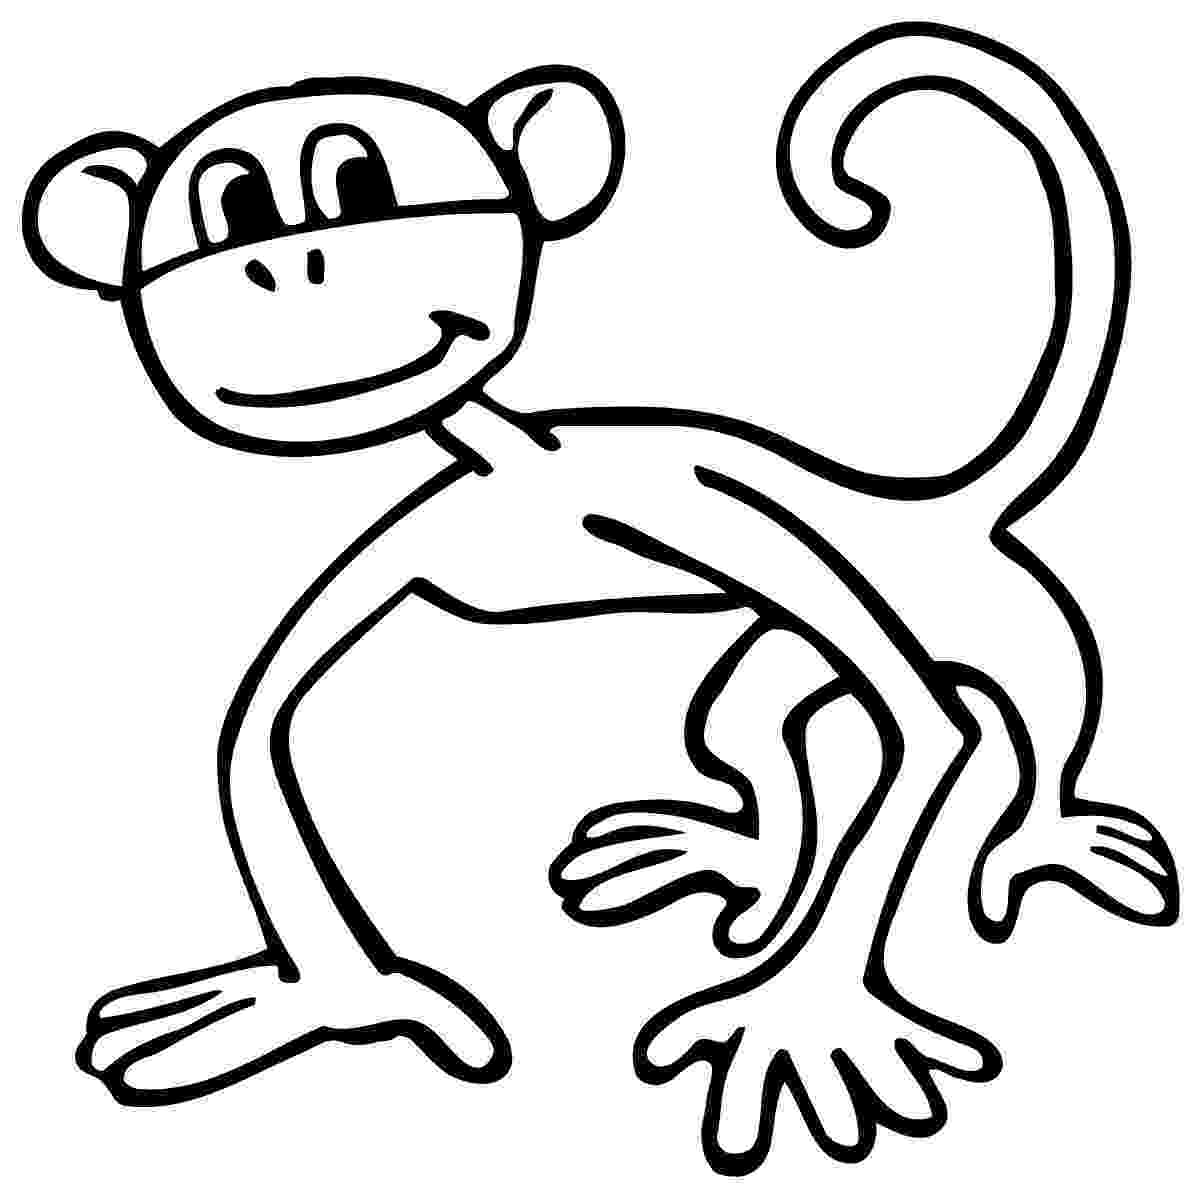 raiders coloring pages go raiders coloring page twisty noodle pages coloring raiders 